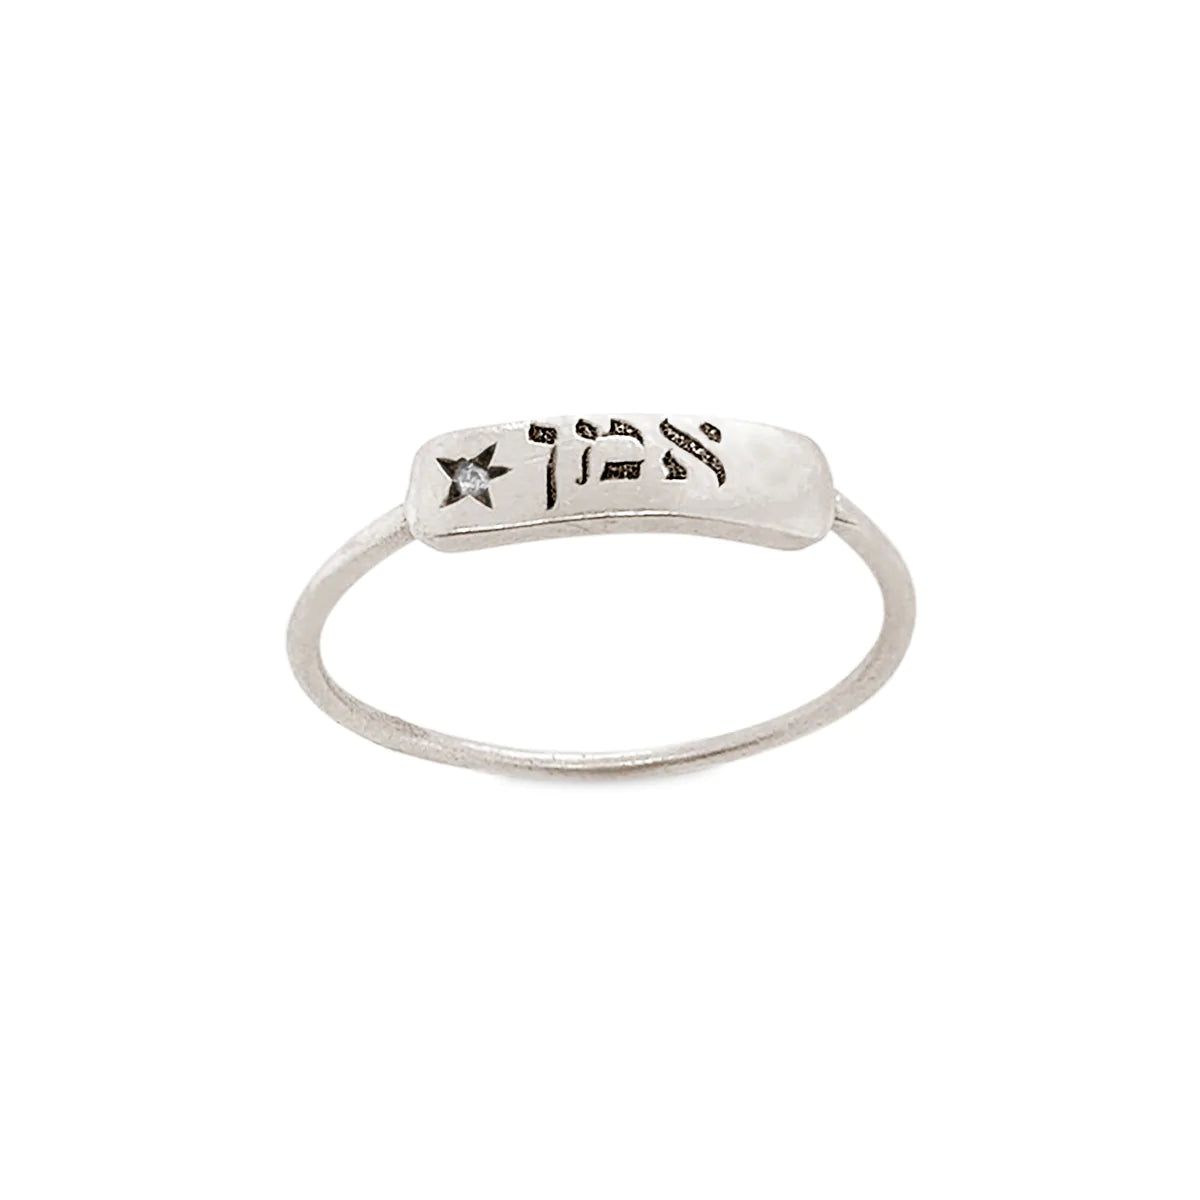 {{ product.name}} - מיכל בן ישי